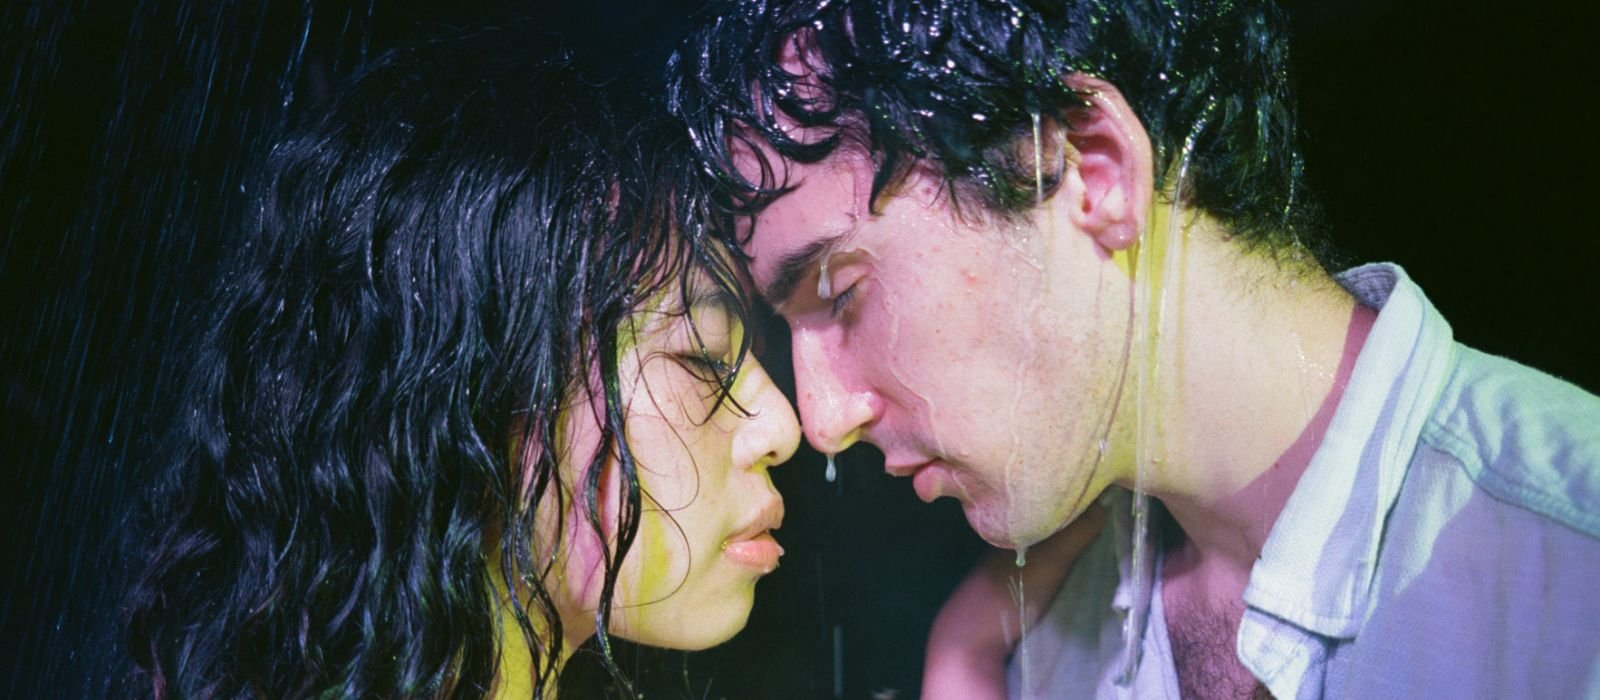 A woman and a man face each other with their noses touching, water running down their hair and faces.